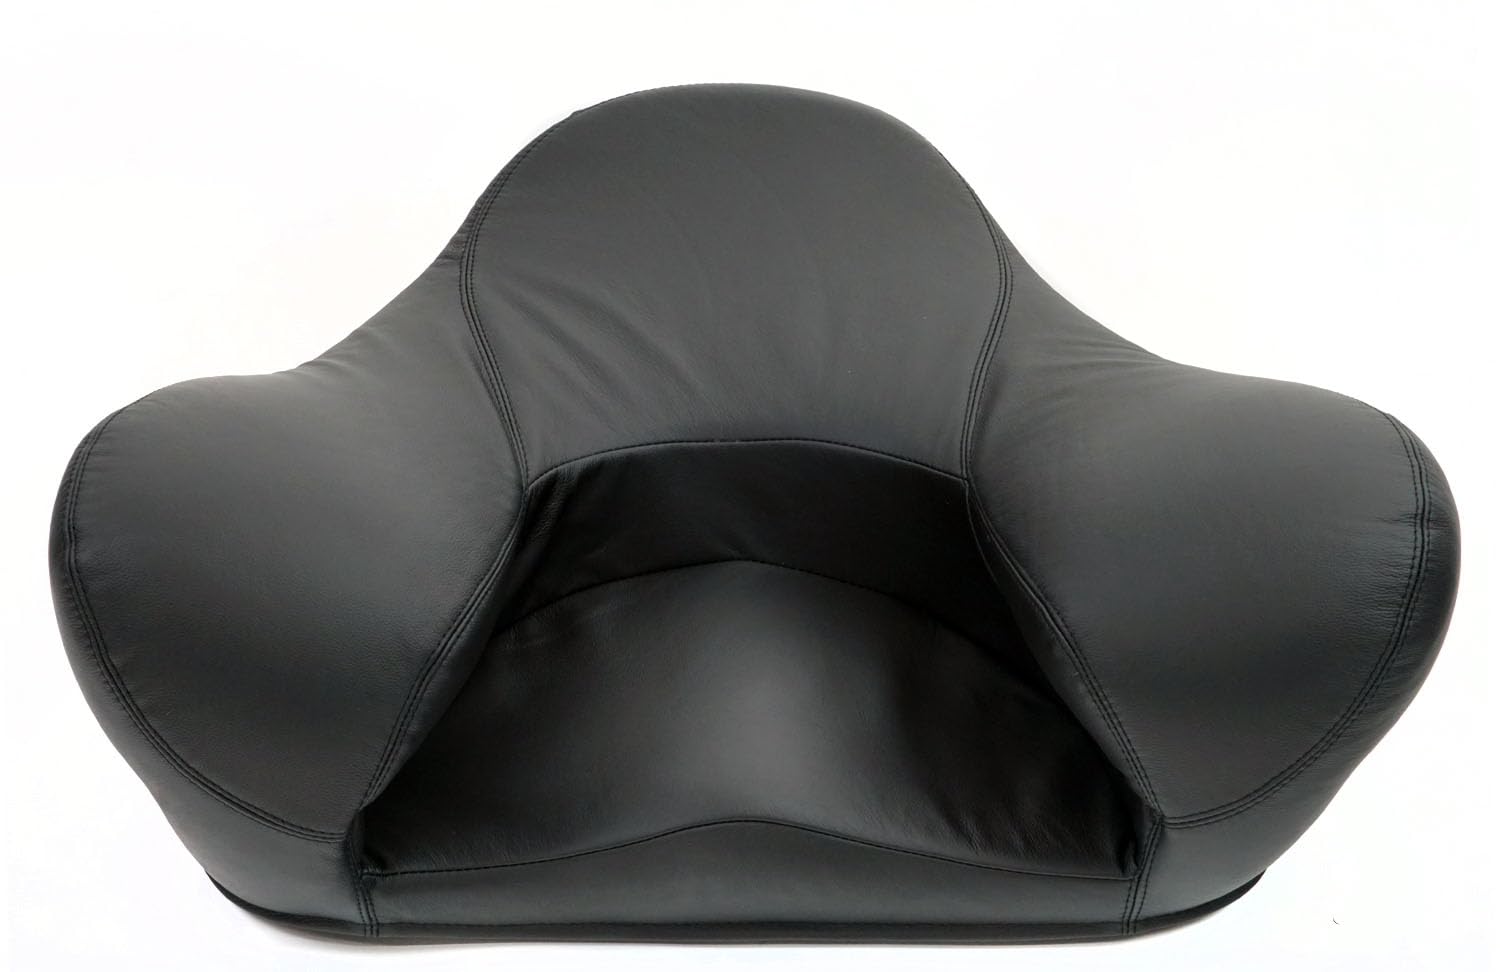 Alexia Meditation Seat - Ergonomically Correct for the Human Physiology Zen Yoga Ergonomic Chairs Foam Cushion Home or Office